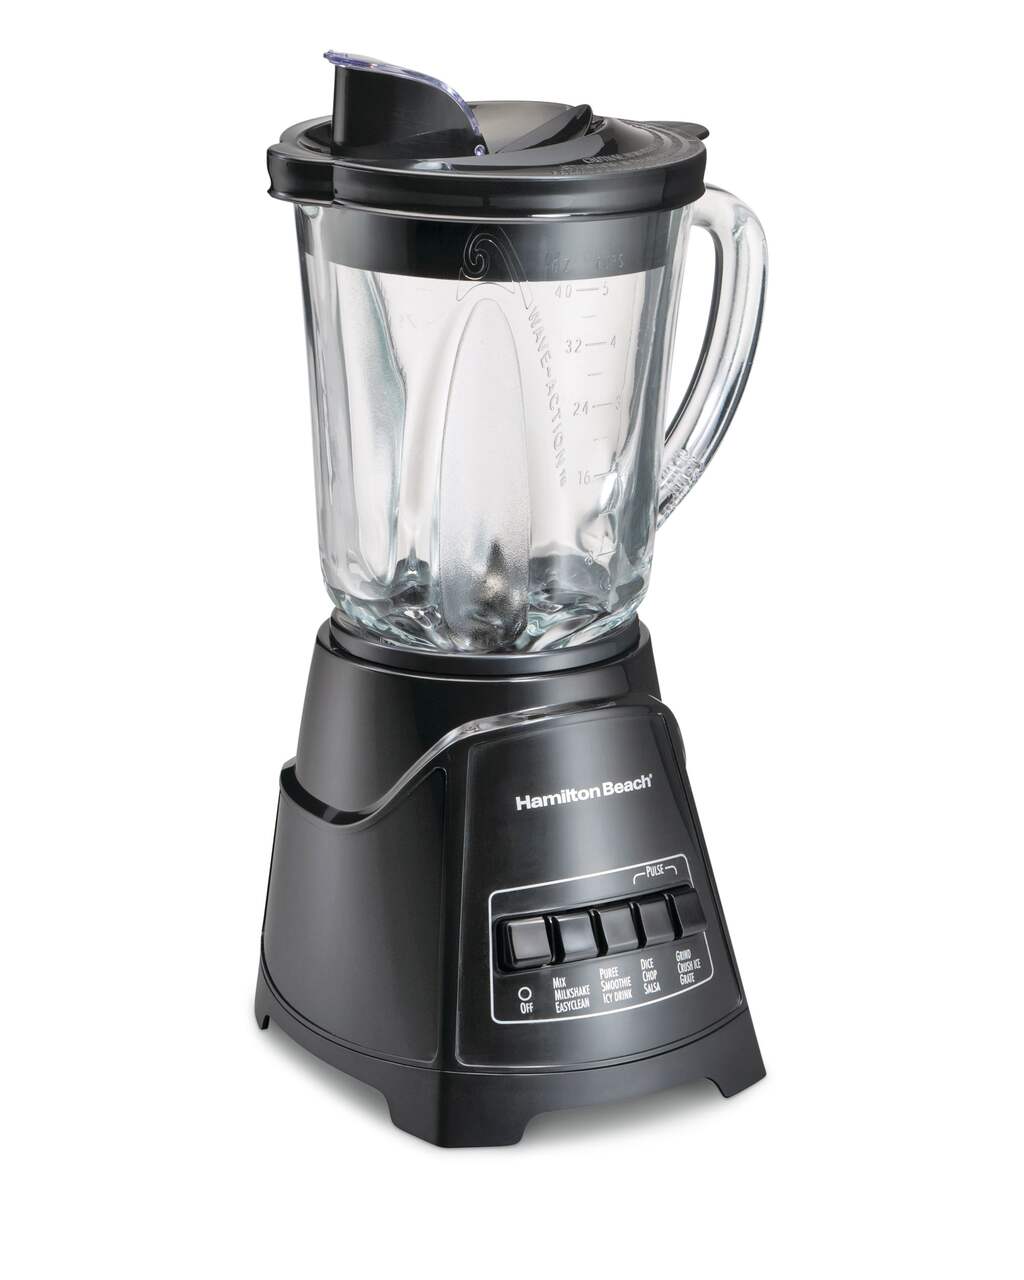 https://media-www.canadiantire.ca/product/living/kitchen/kitchen-appliances/0431252/hamilton-beach-power-elite-multi-function-blender-a0439924-f66c-47e3-9913-2a61d1c88cc6-jpgrendition.jpg?imdensity=1&imwidth=640&impolicy=mZoom